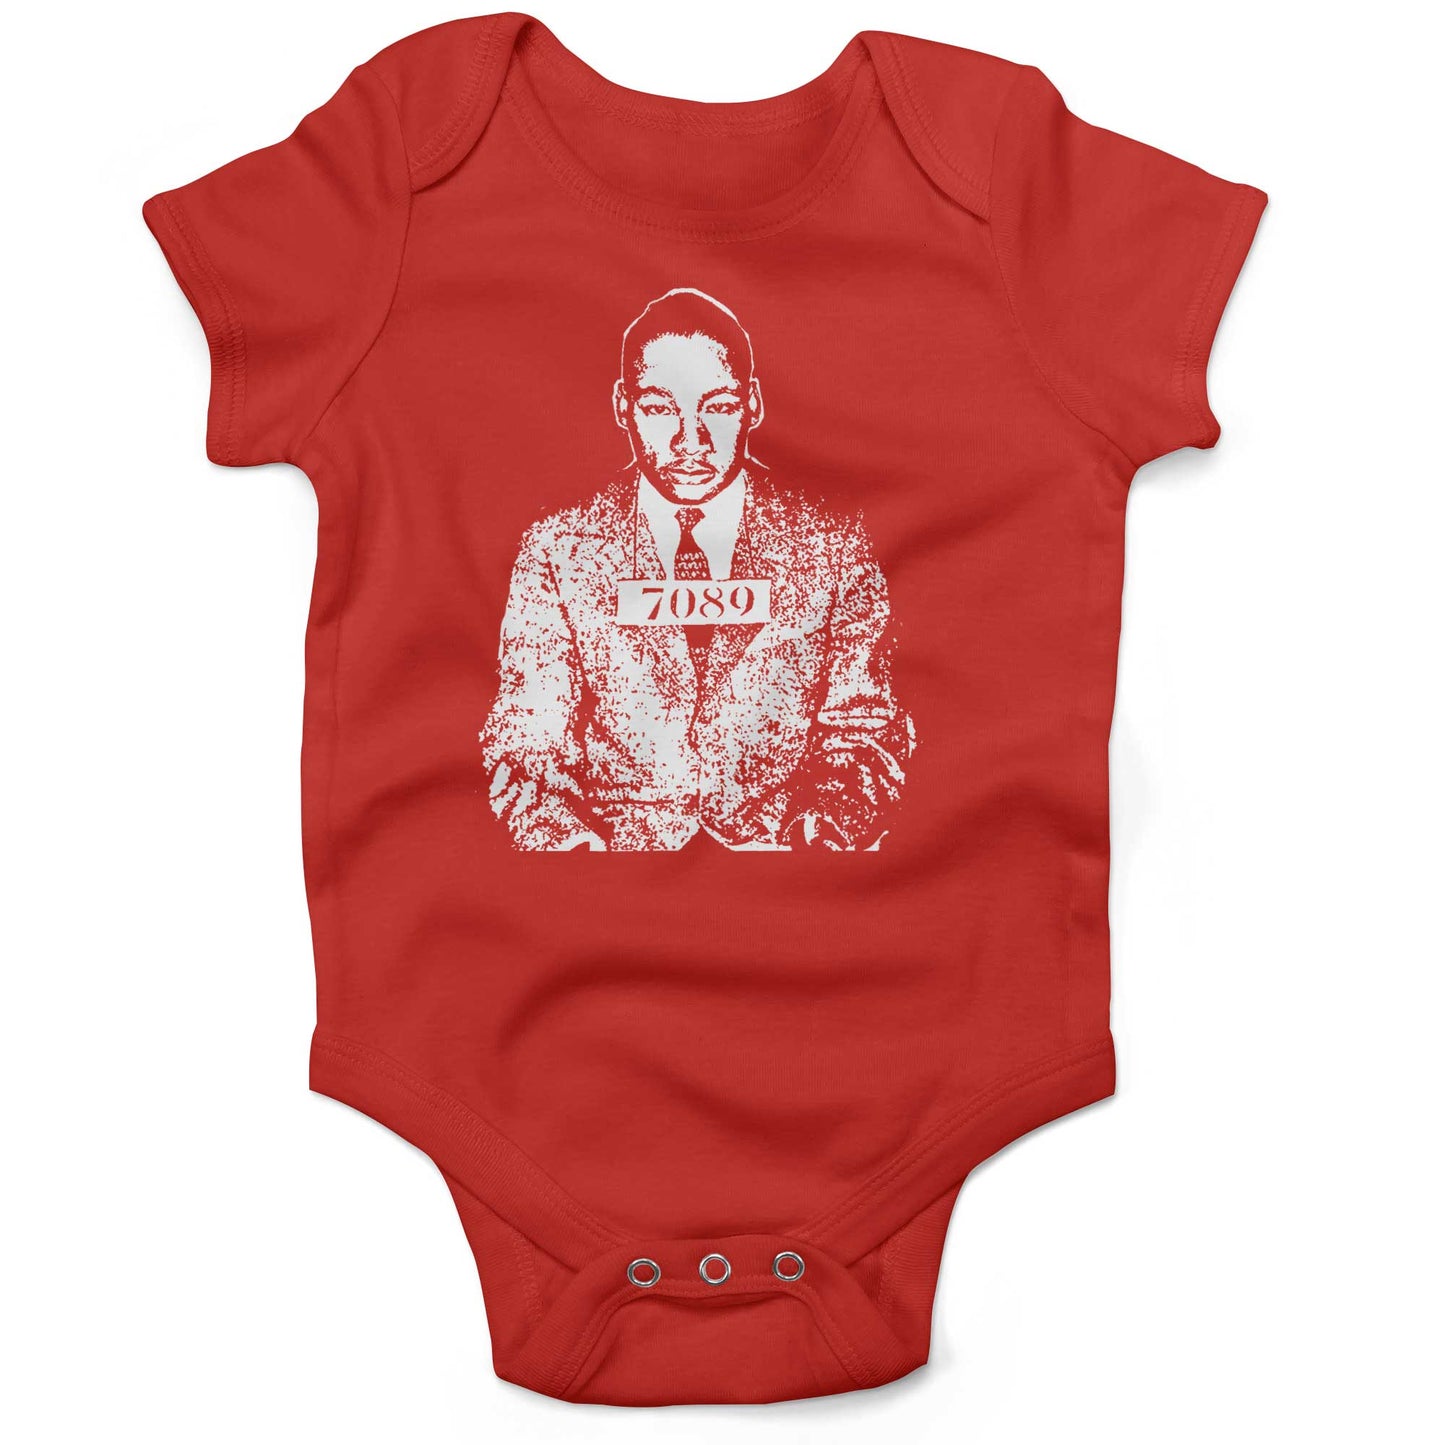 Martin Luther King Jr. Infant Bodysuit-Organic Red-3-6 months